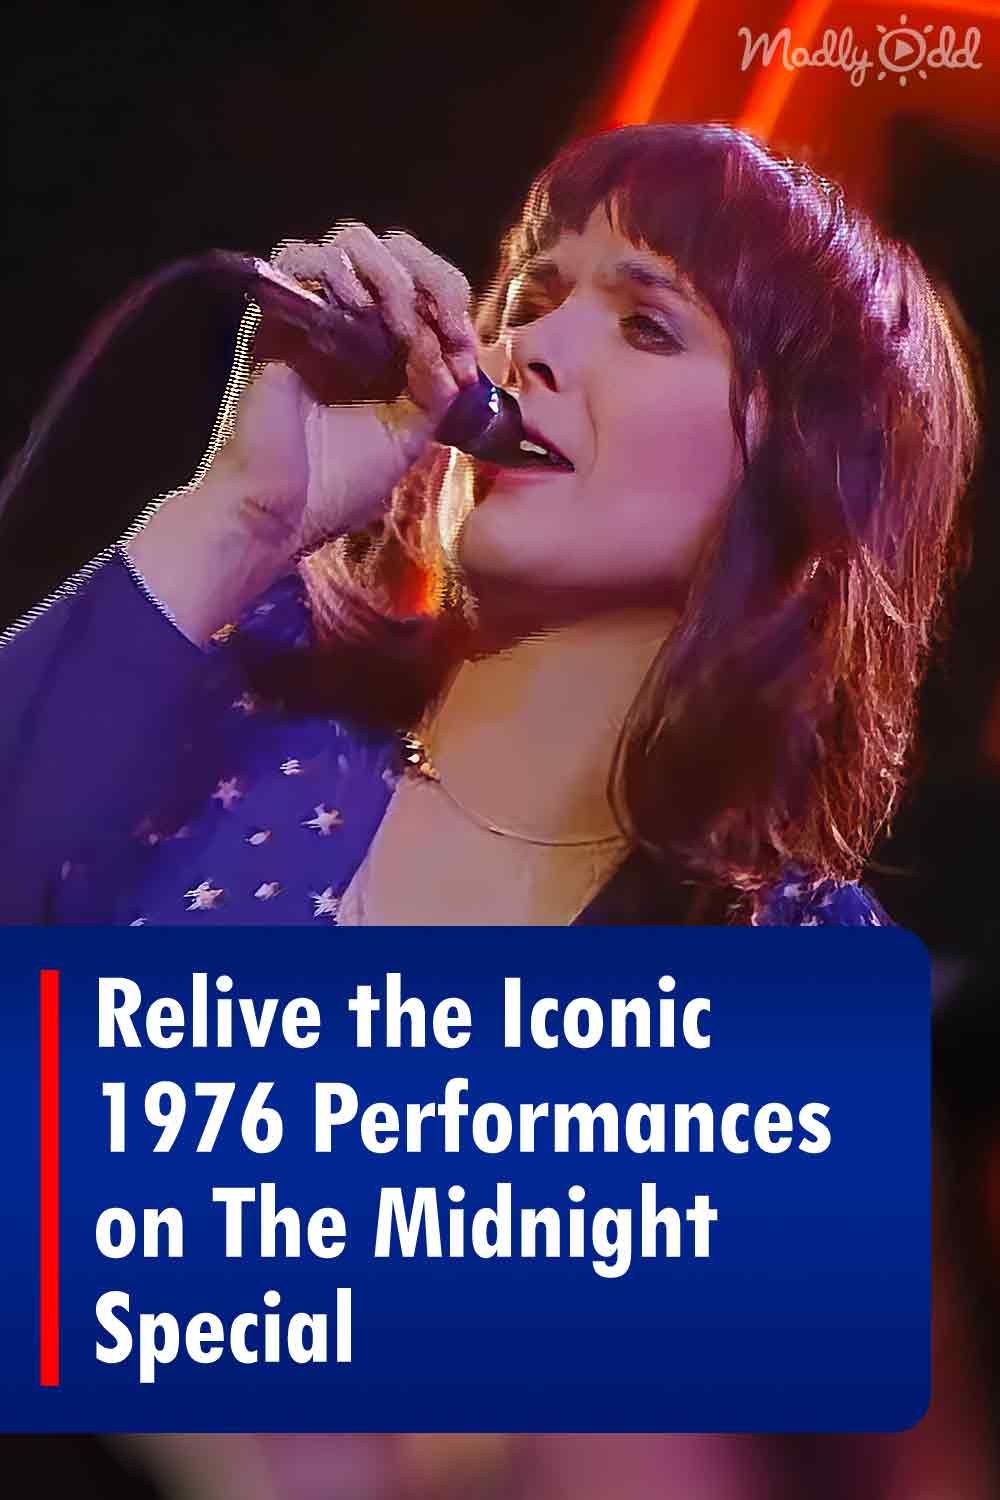 Relive the Iconic 1976 Performances on The Midnight Special